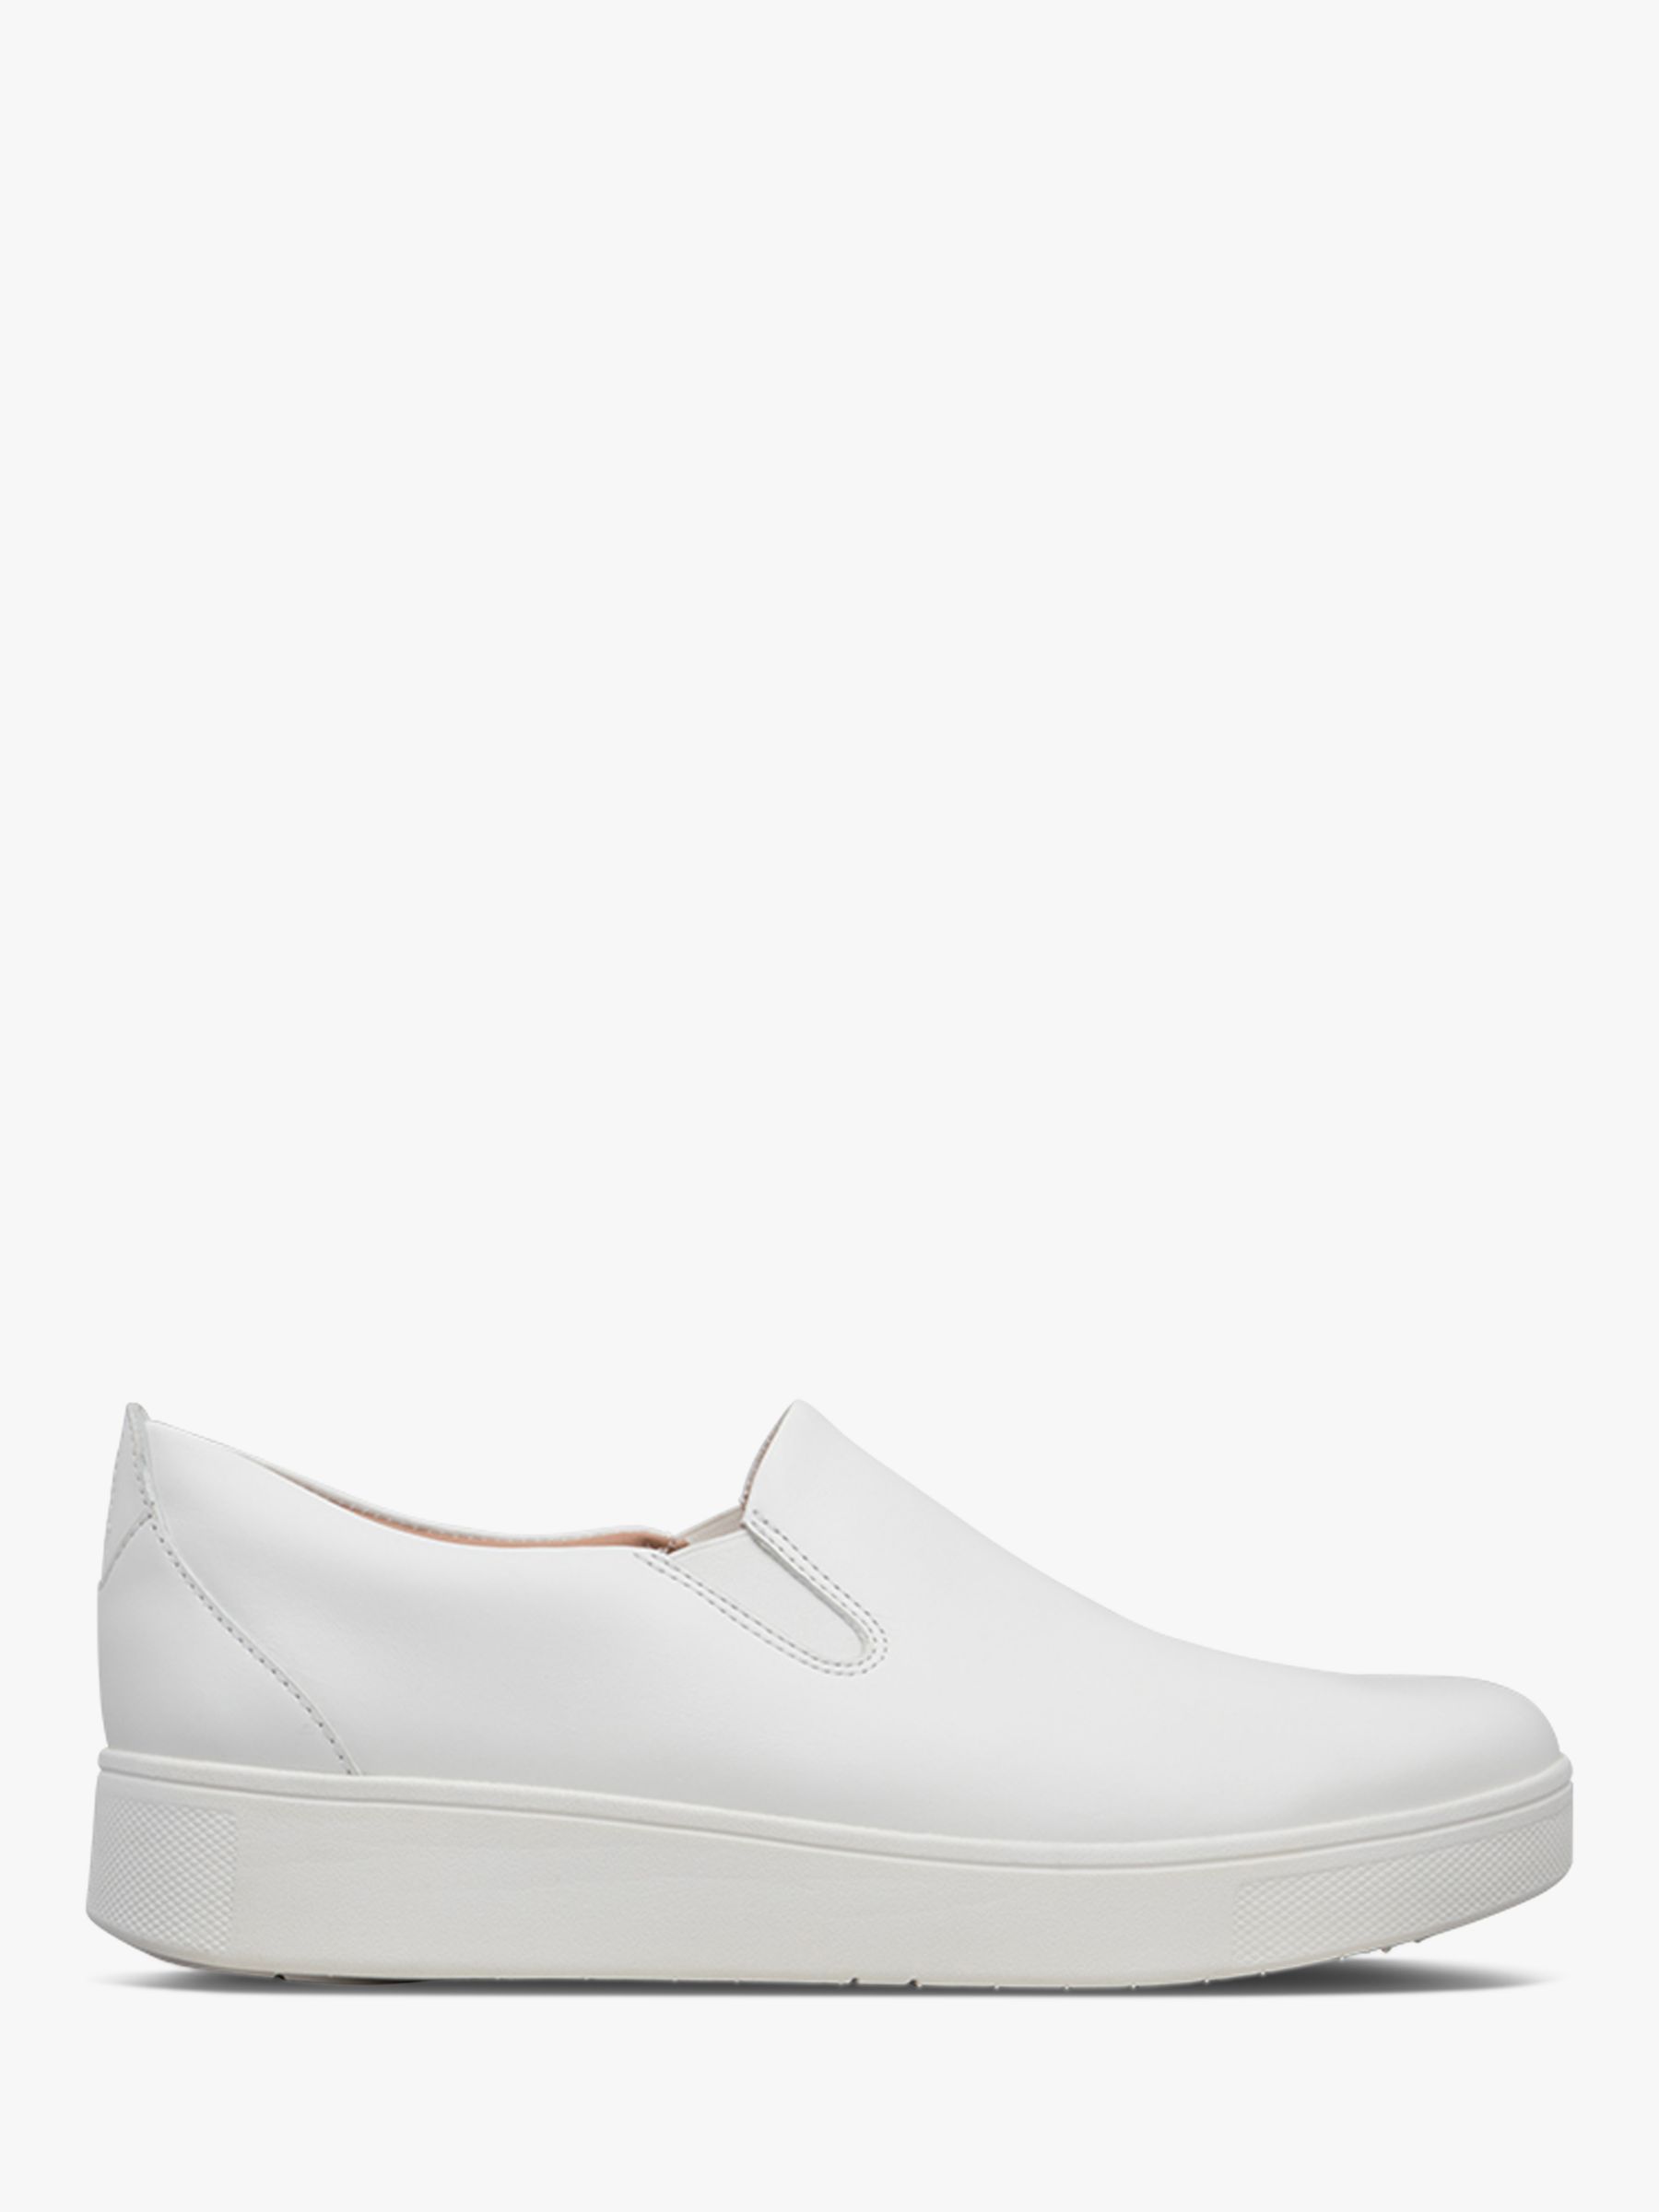 white leather slip on pumps